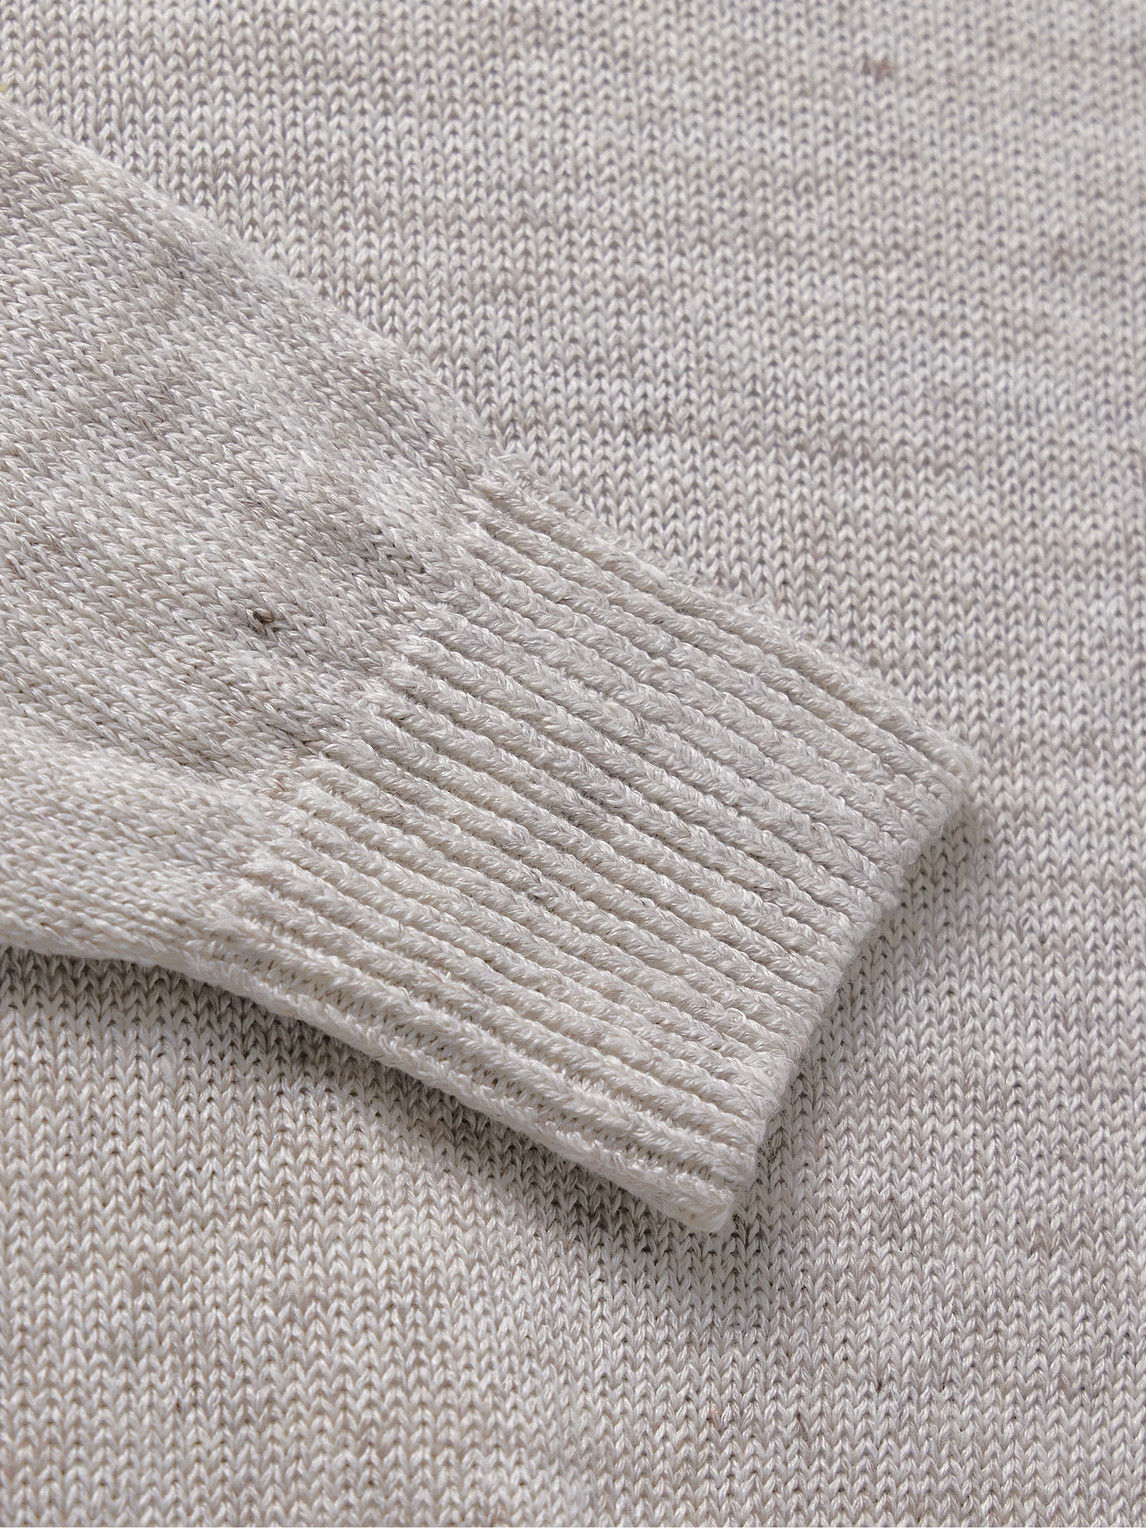 Shop Inis Meain Linen Sweater In Gray